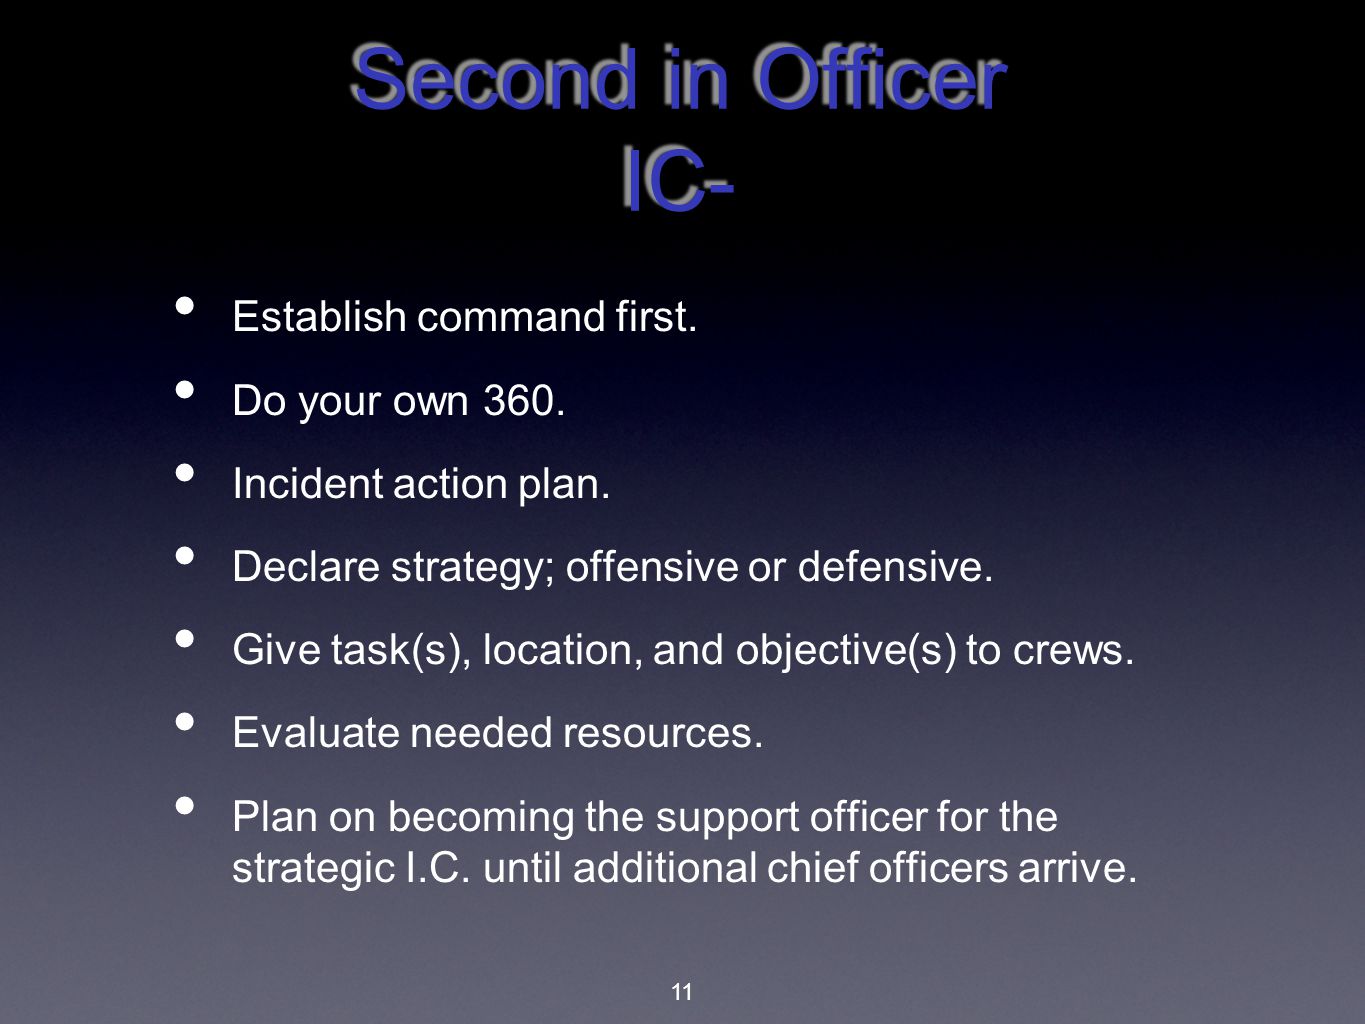 Second in Officer IC- Establish command first. Do your own 360.